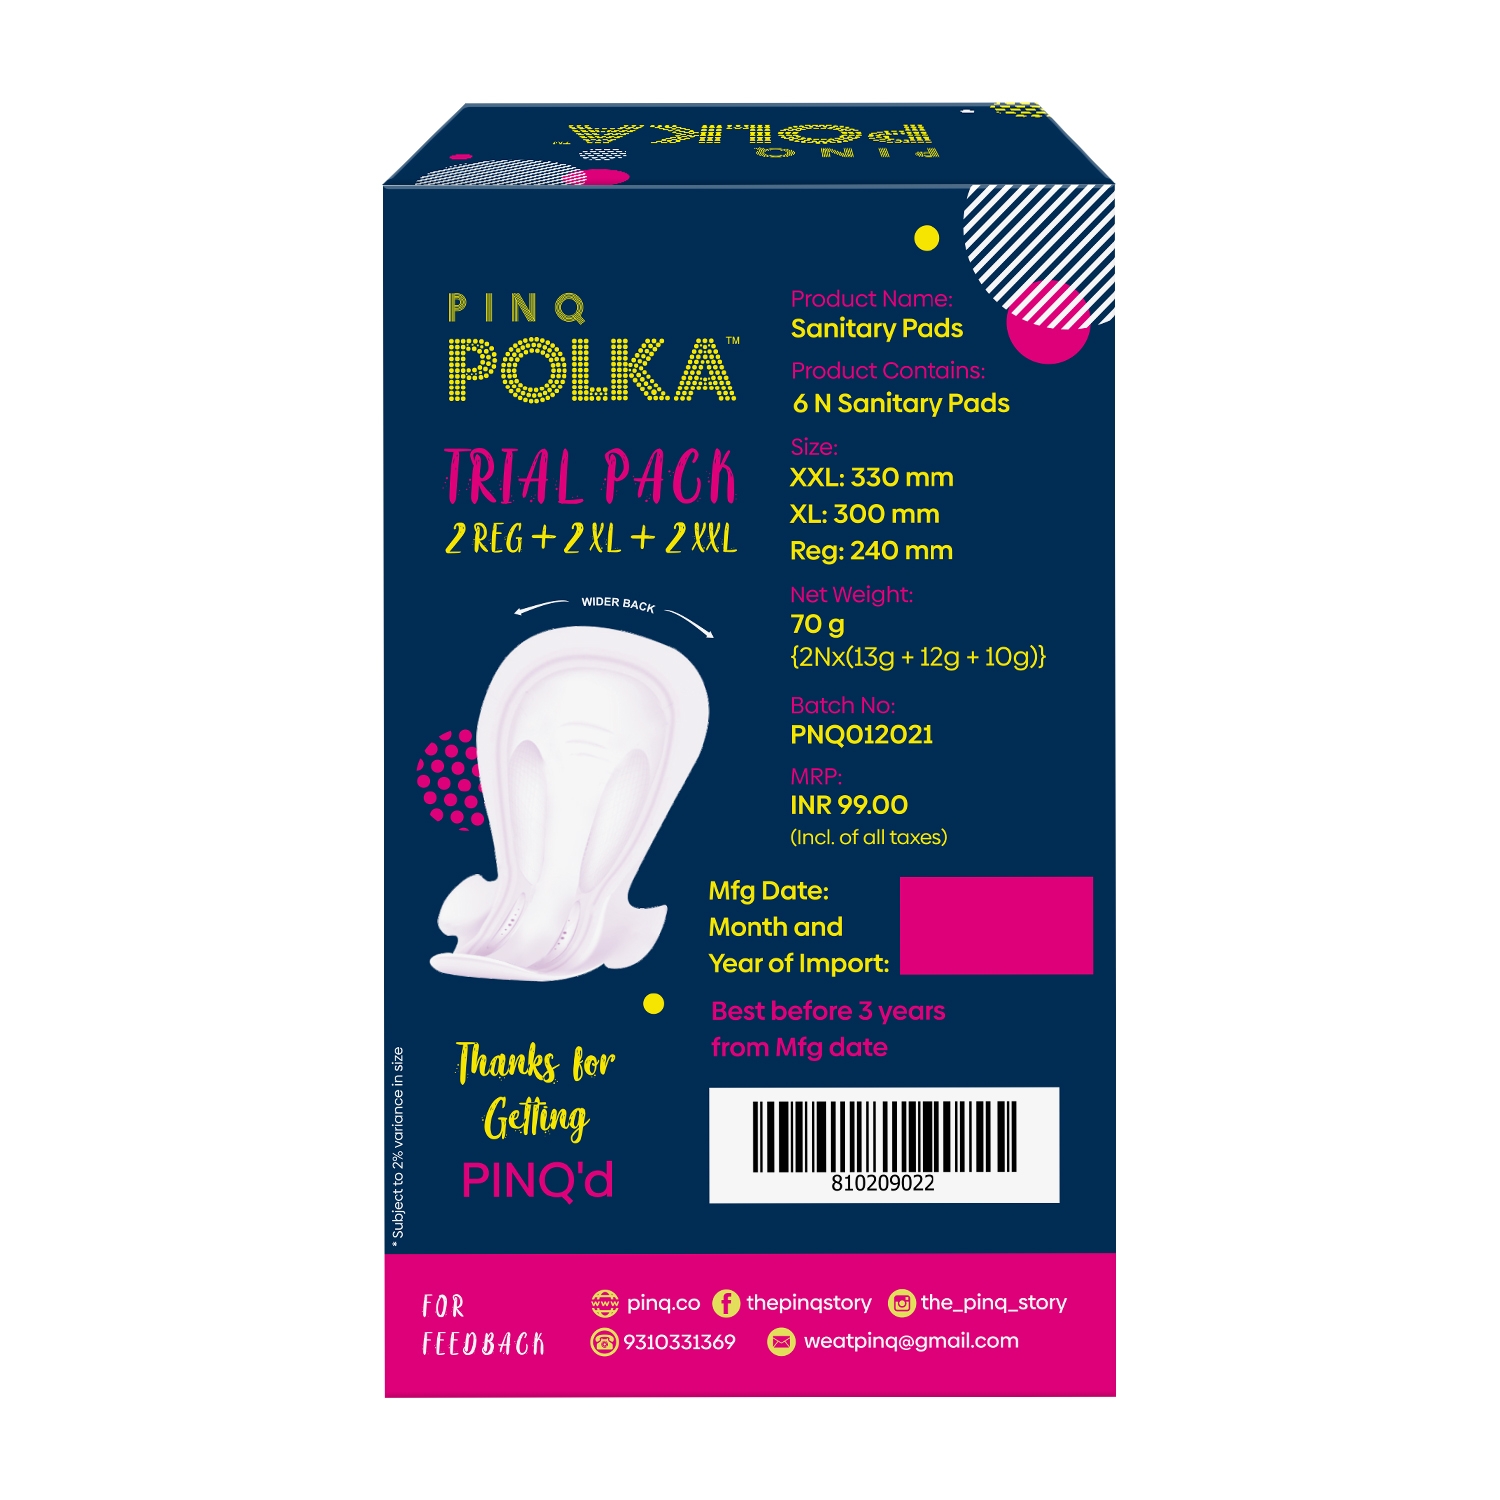 PINQ POLKA Period Trial Pack - Premium Organic Cotton Soft Ultra Sanitary Pads 4 XXL, 4 XL, 4 Regular,with Individual Biodegradable Disposable Pouch